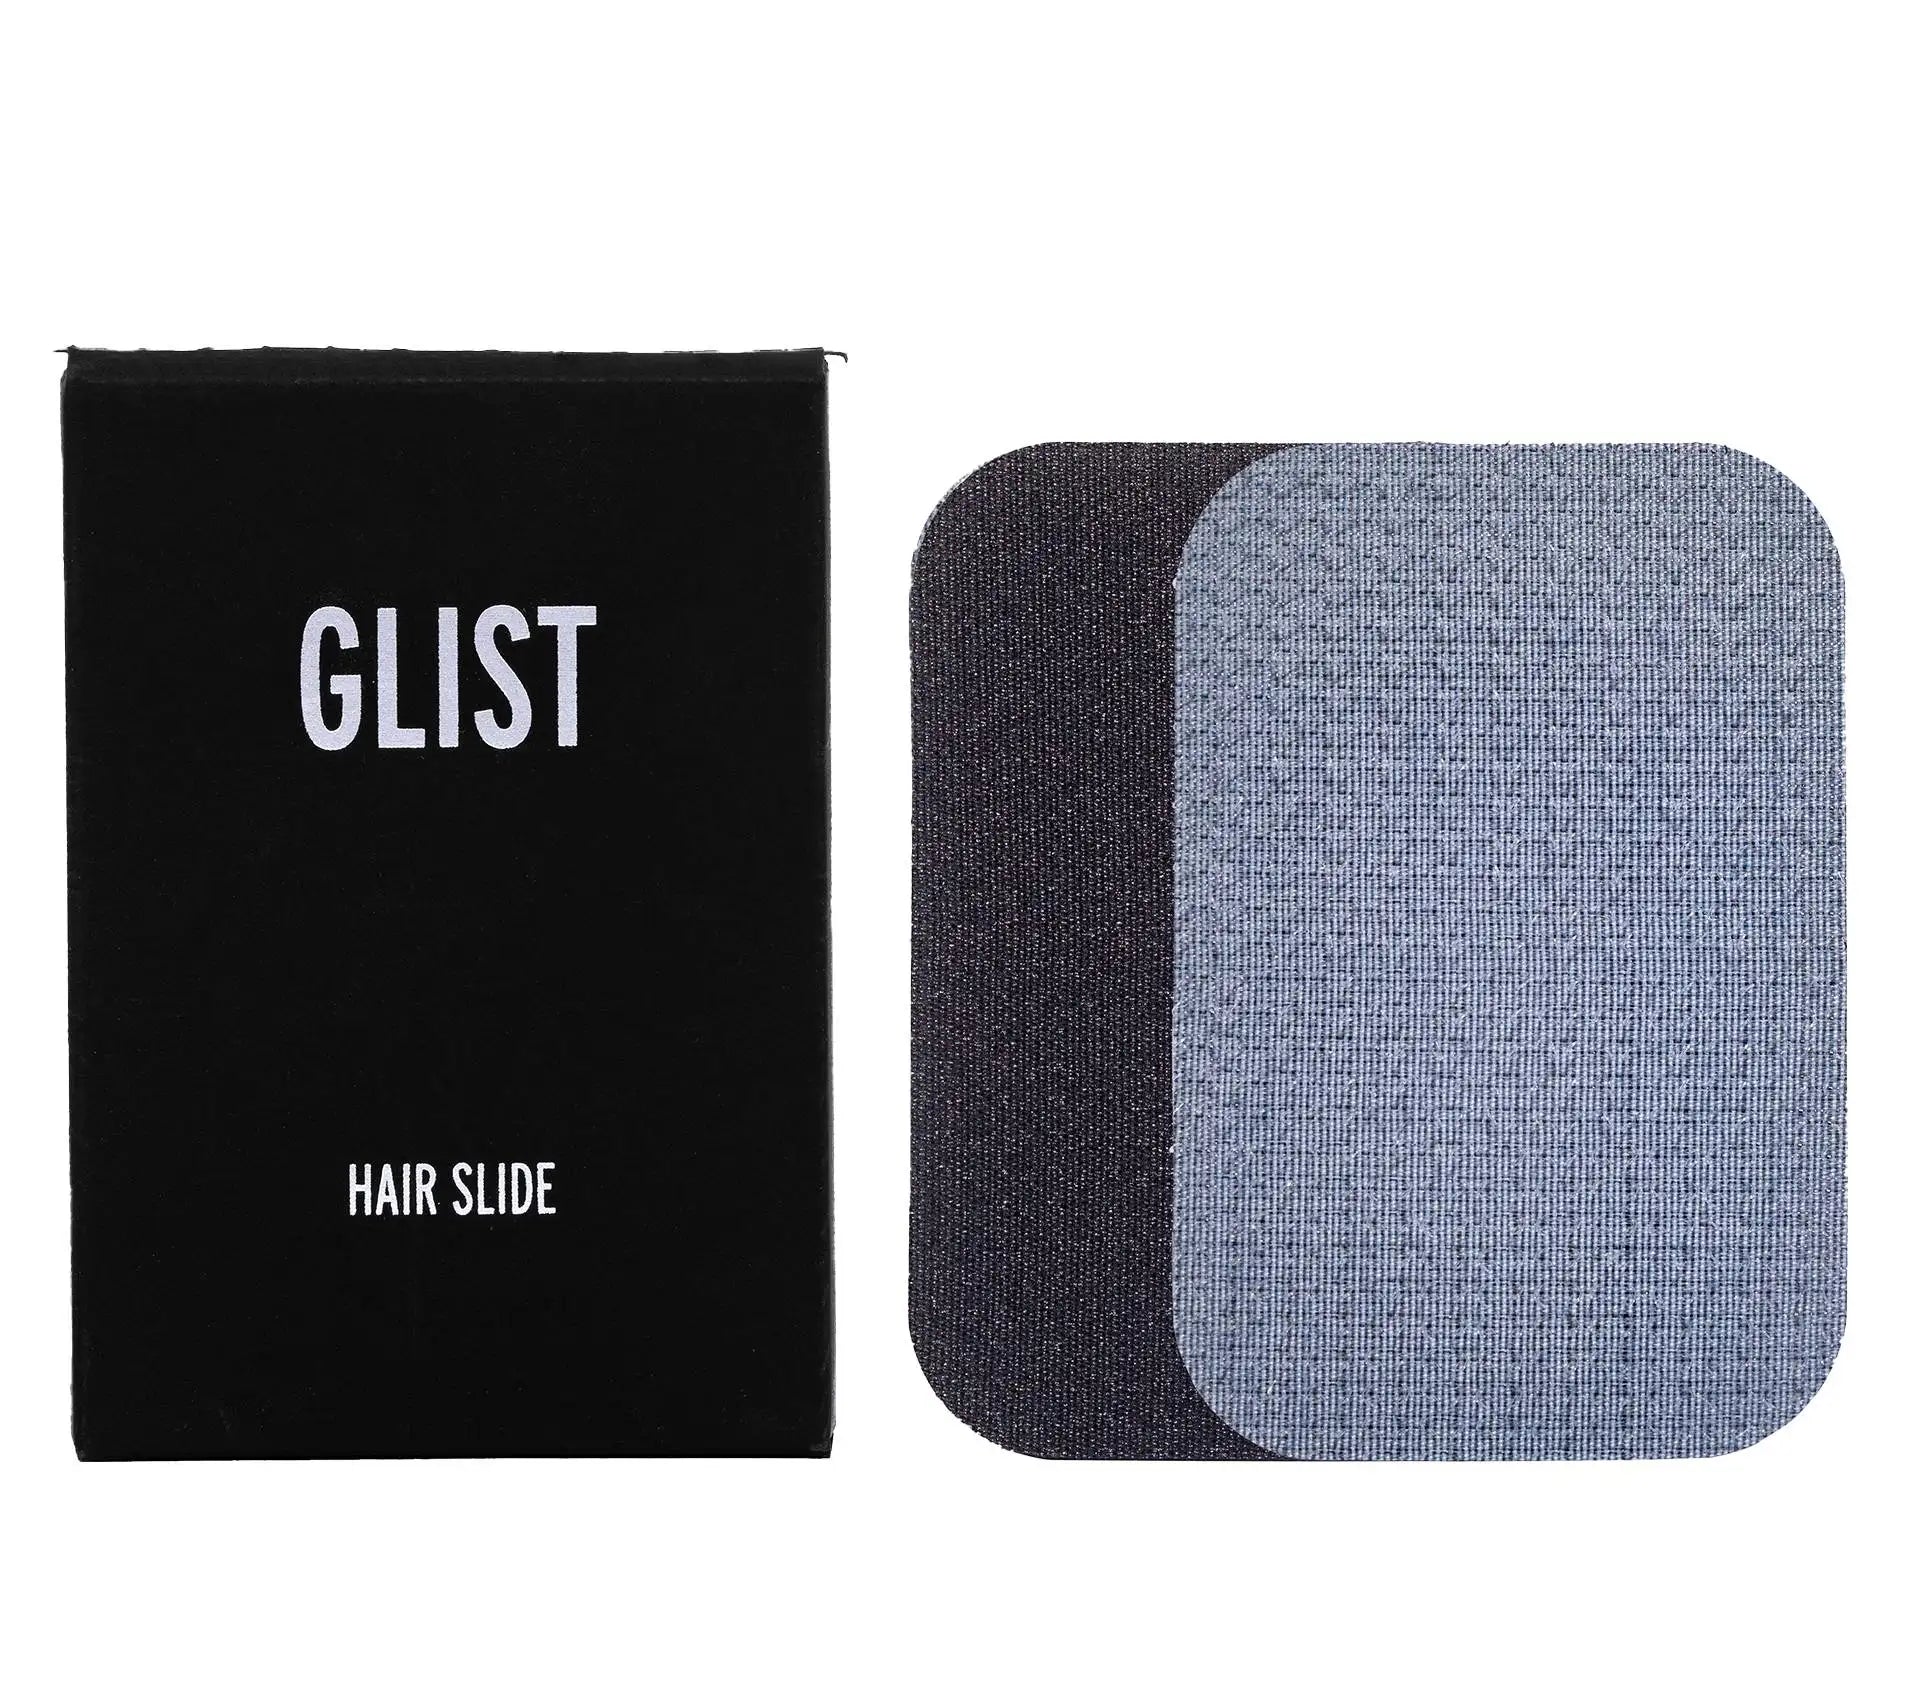 GLIST Hair Slide Product and Tool Black